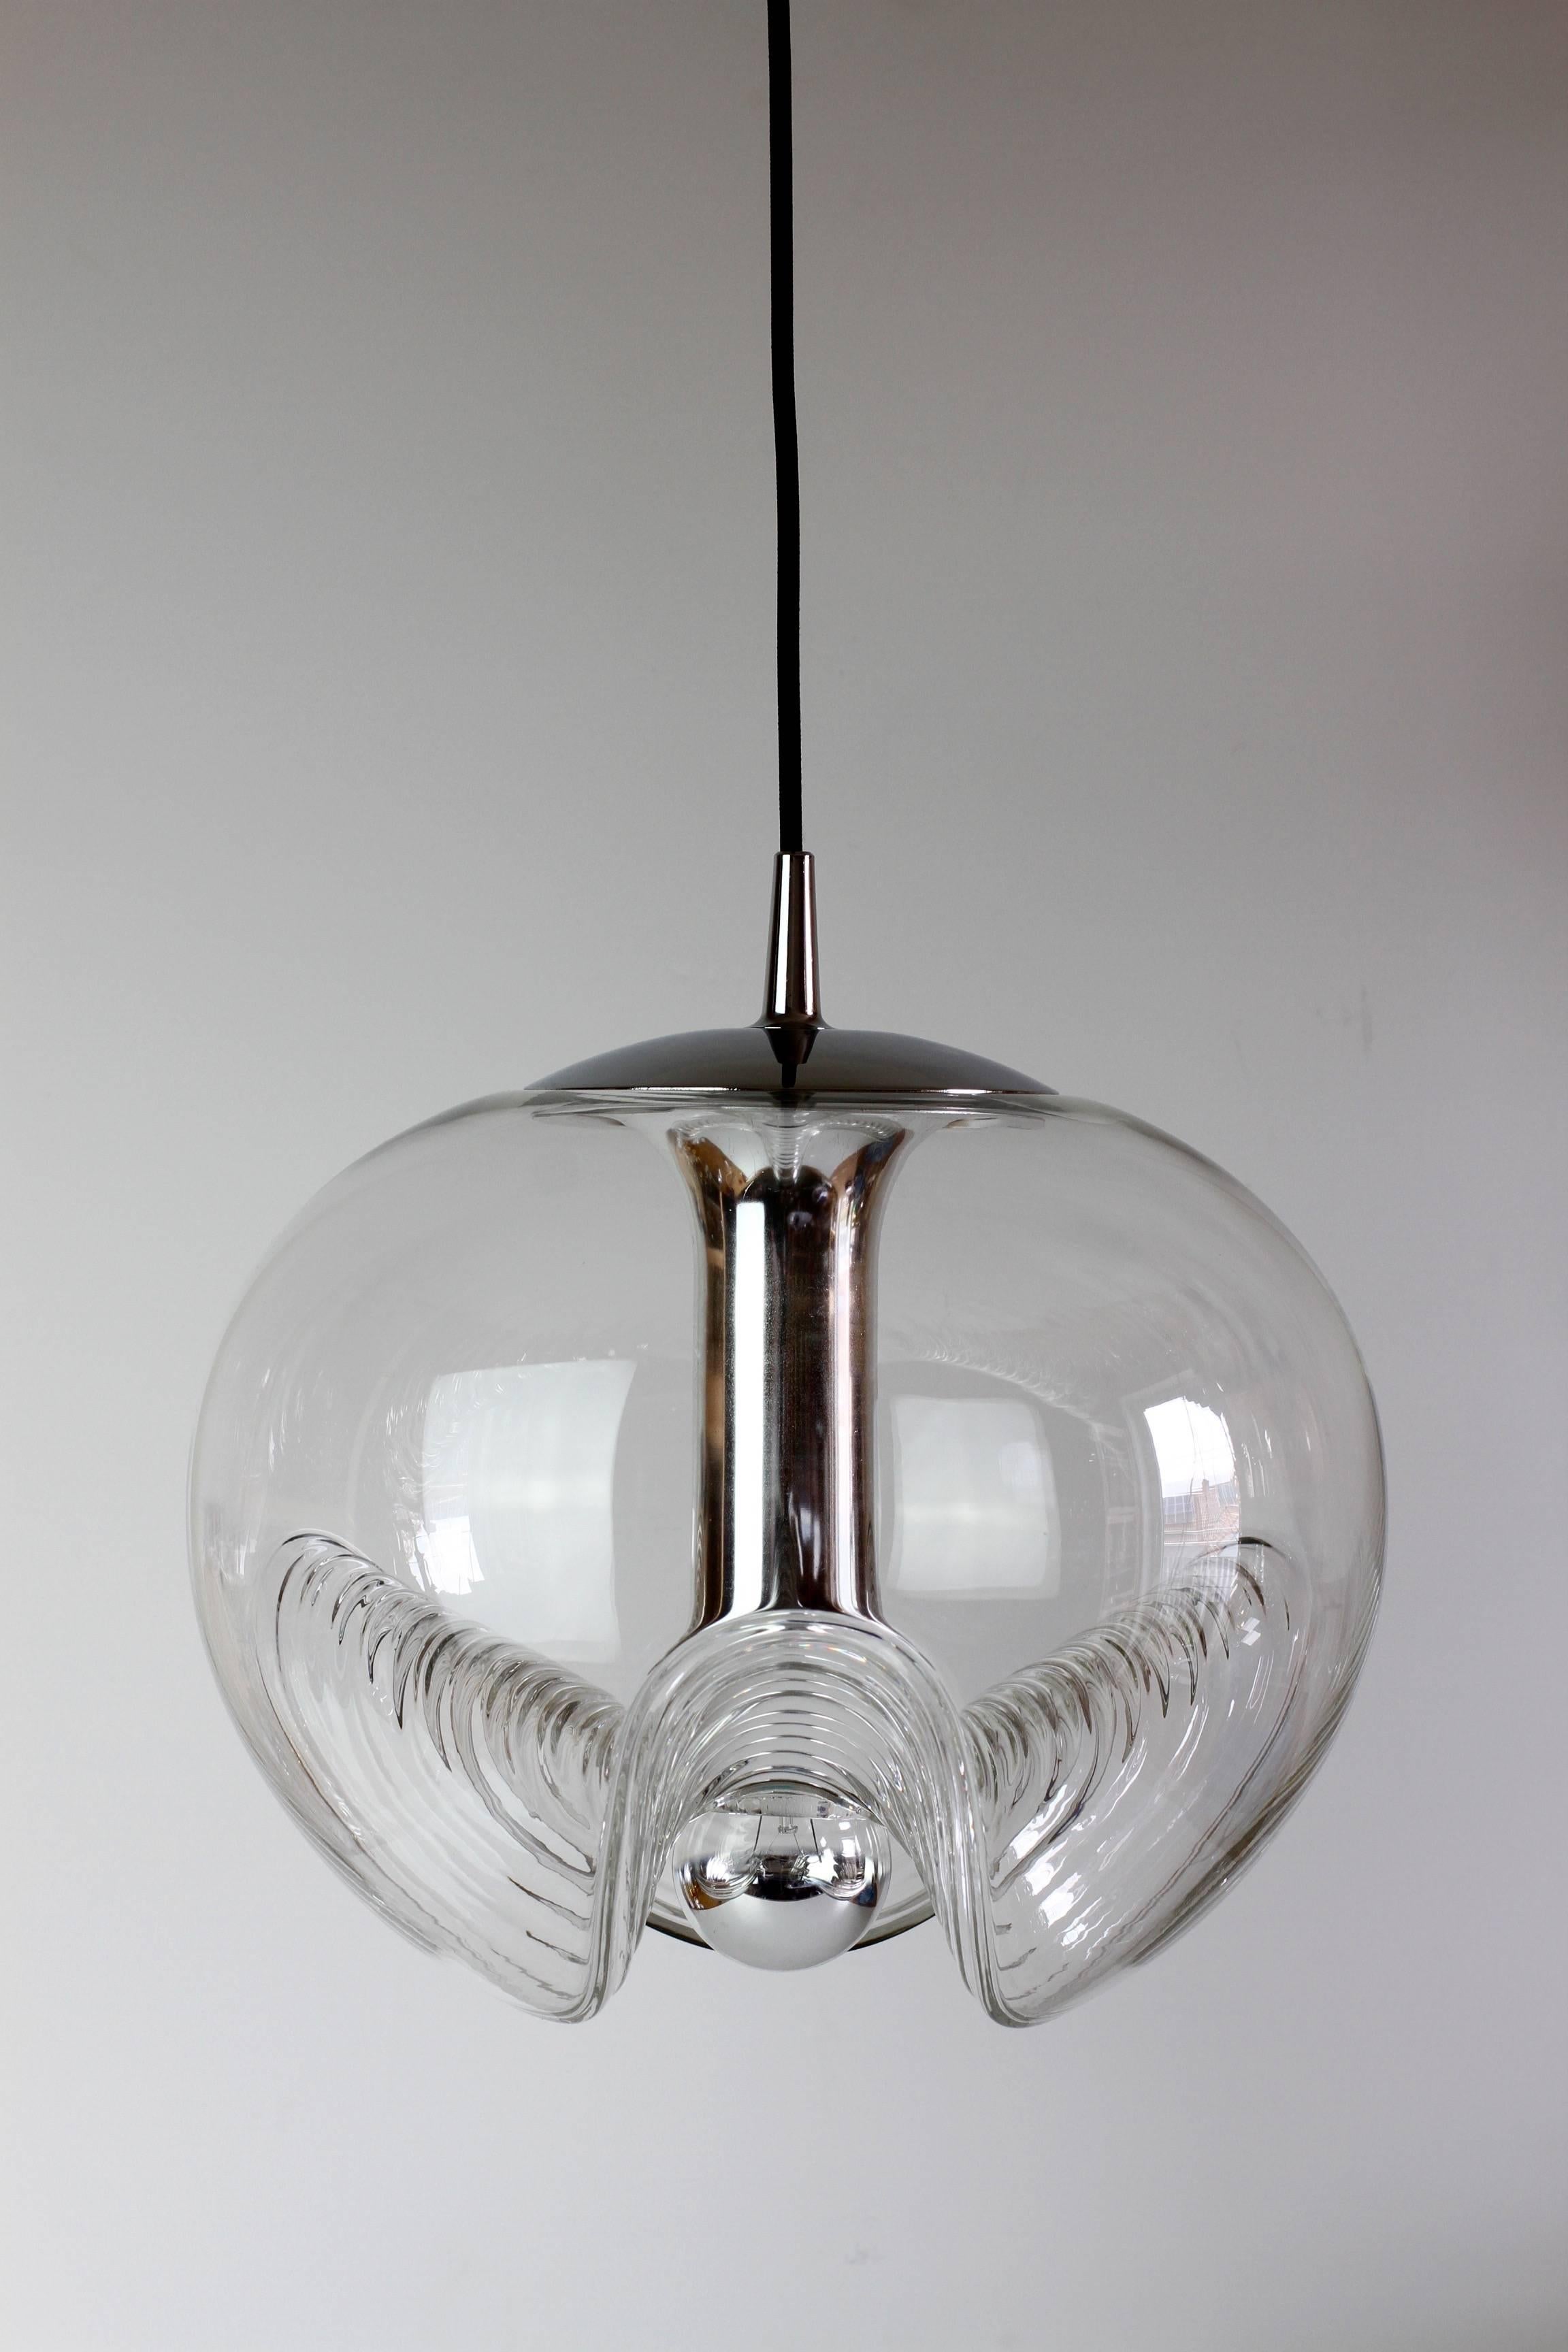 Beautiful Mid-Century design by Koch & Lowy for Peill & Putzler in the 1970s. This is an absolutely Classic piece of design, featuring a clear glass globe shade with a waved or ribbed molded bubble form, casting a beautiful rippled light. 

This is